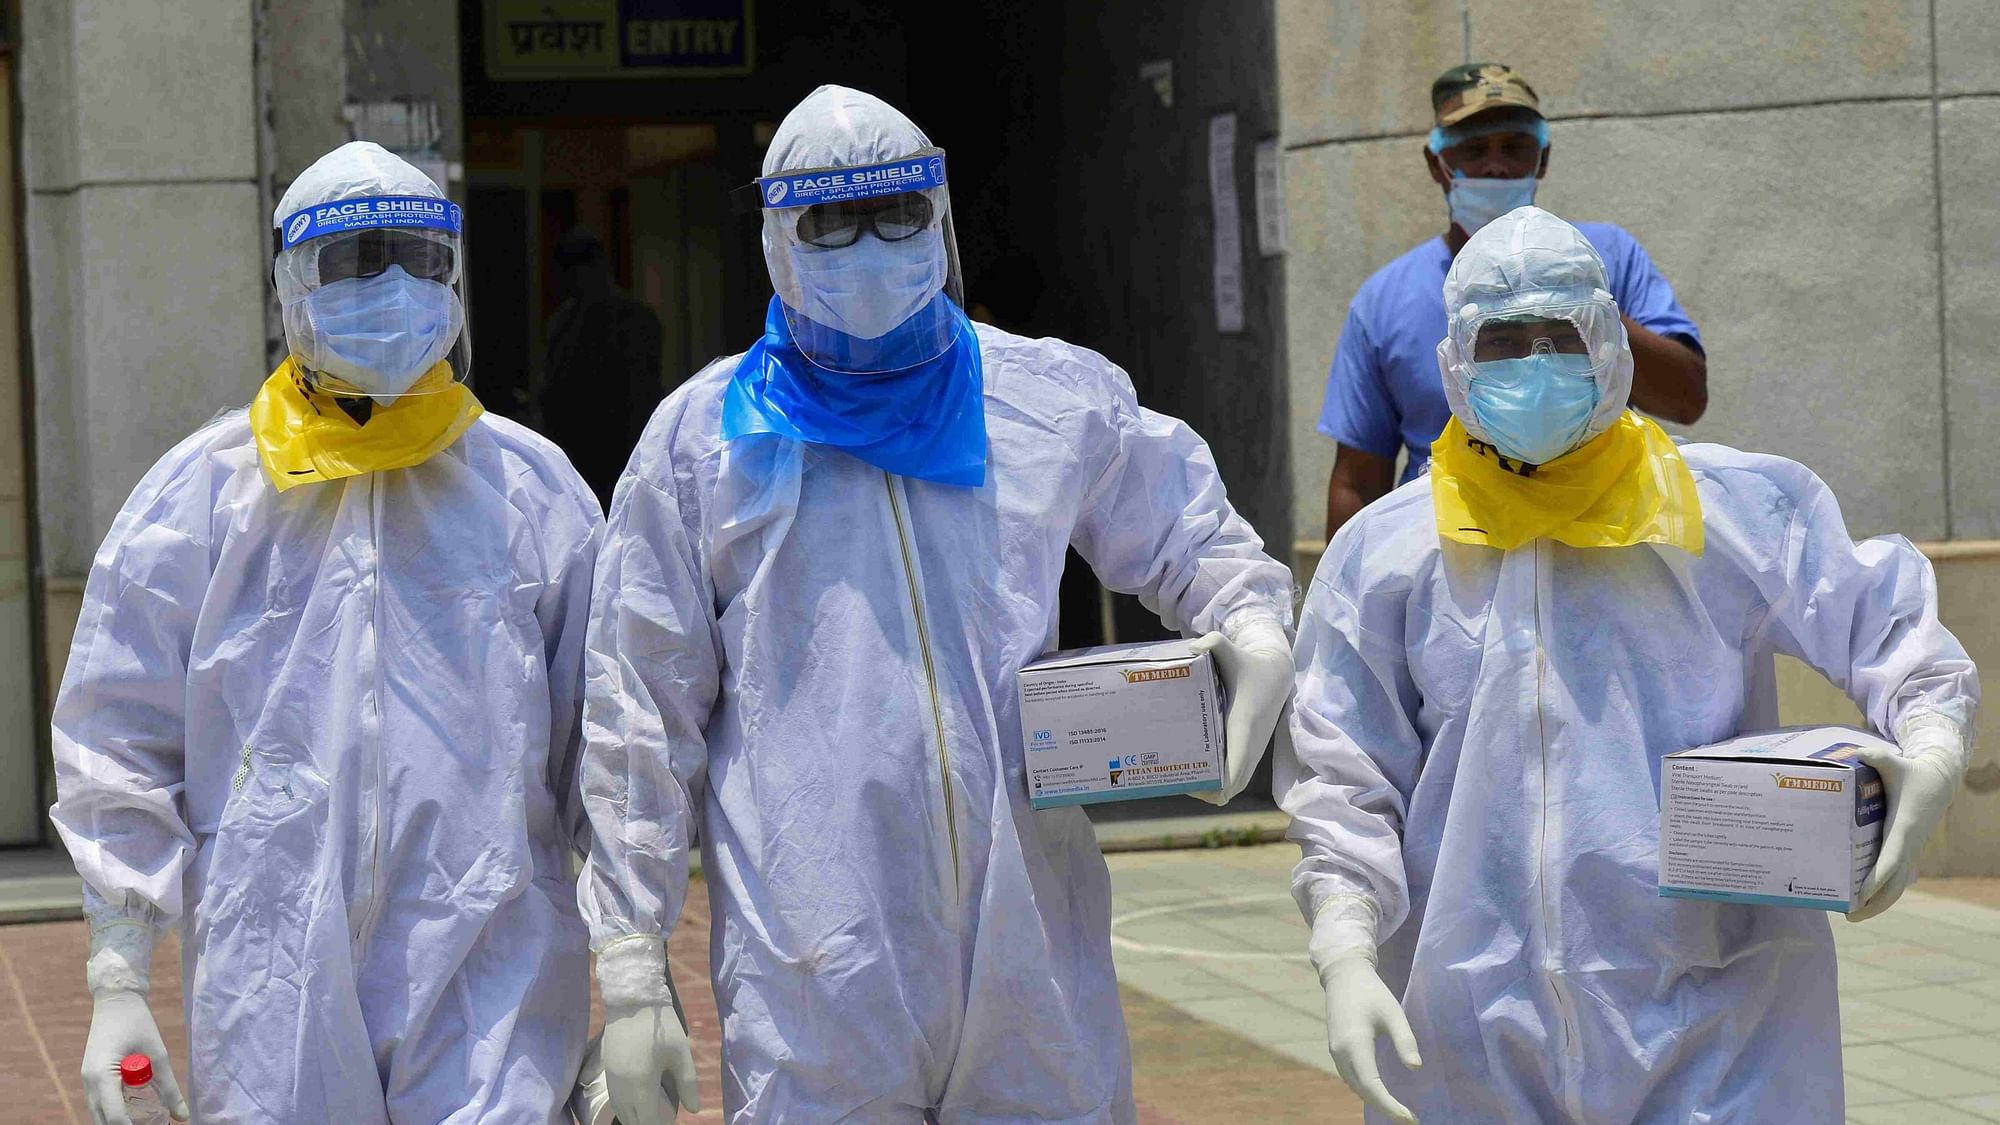 Medics arrive to take samples of suspected COVID-19 patients for lab tests at a government hospital in New Delhi. Image used for representational purposes.